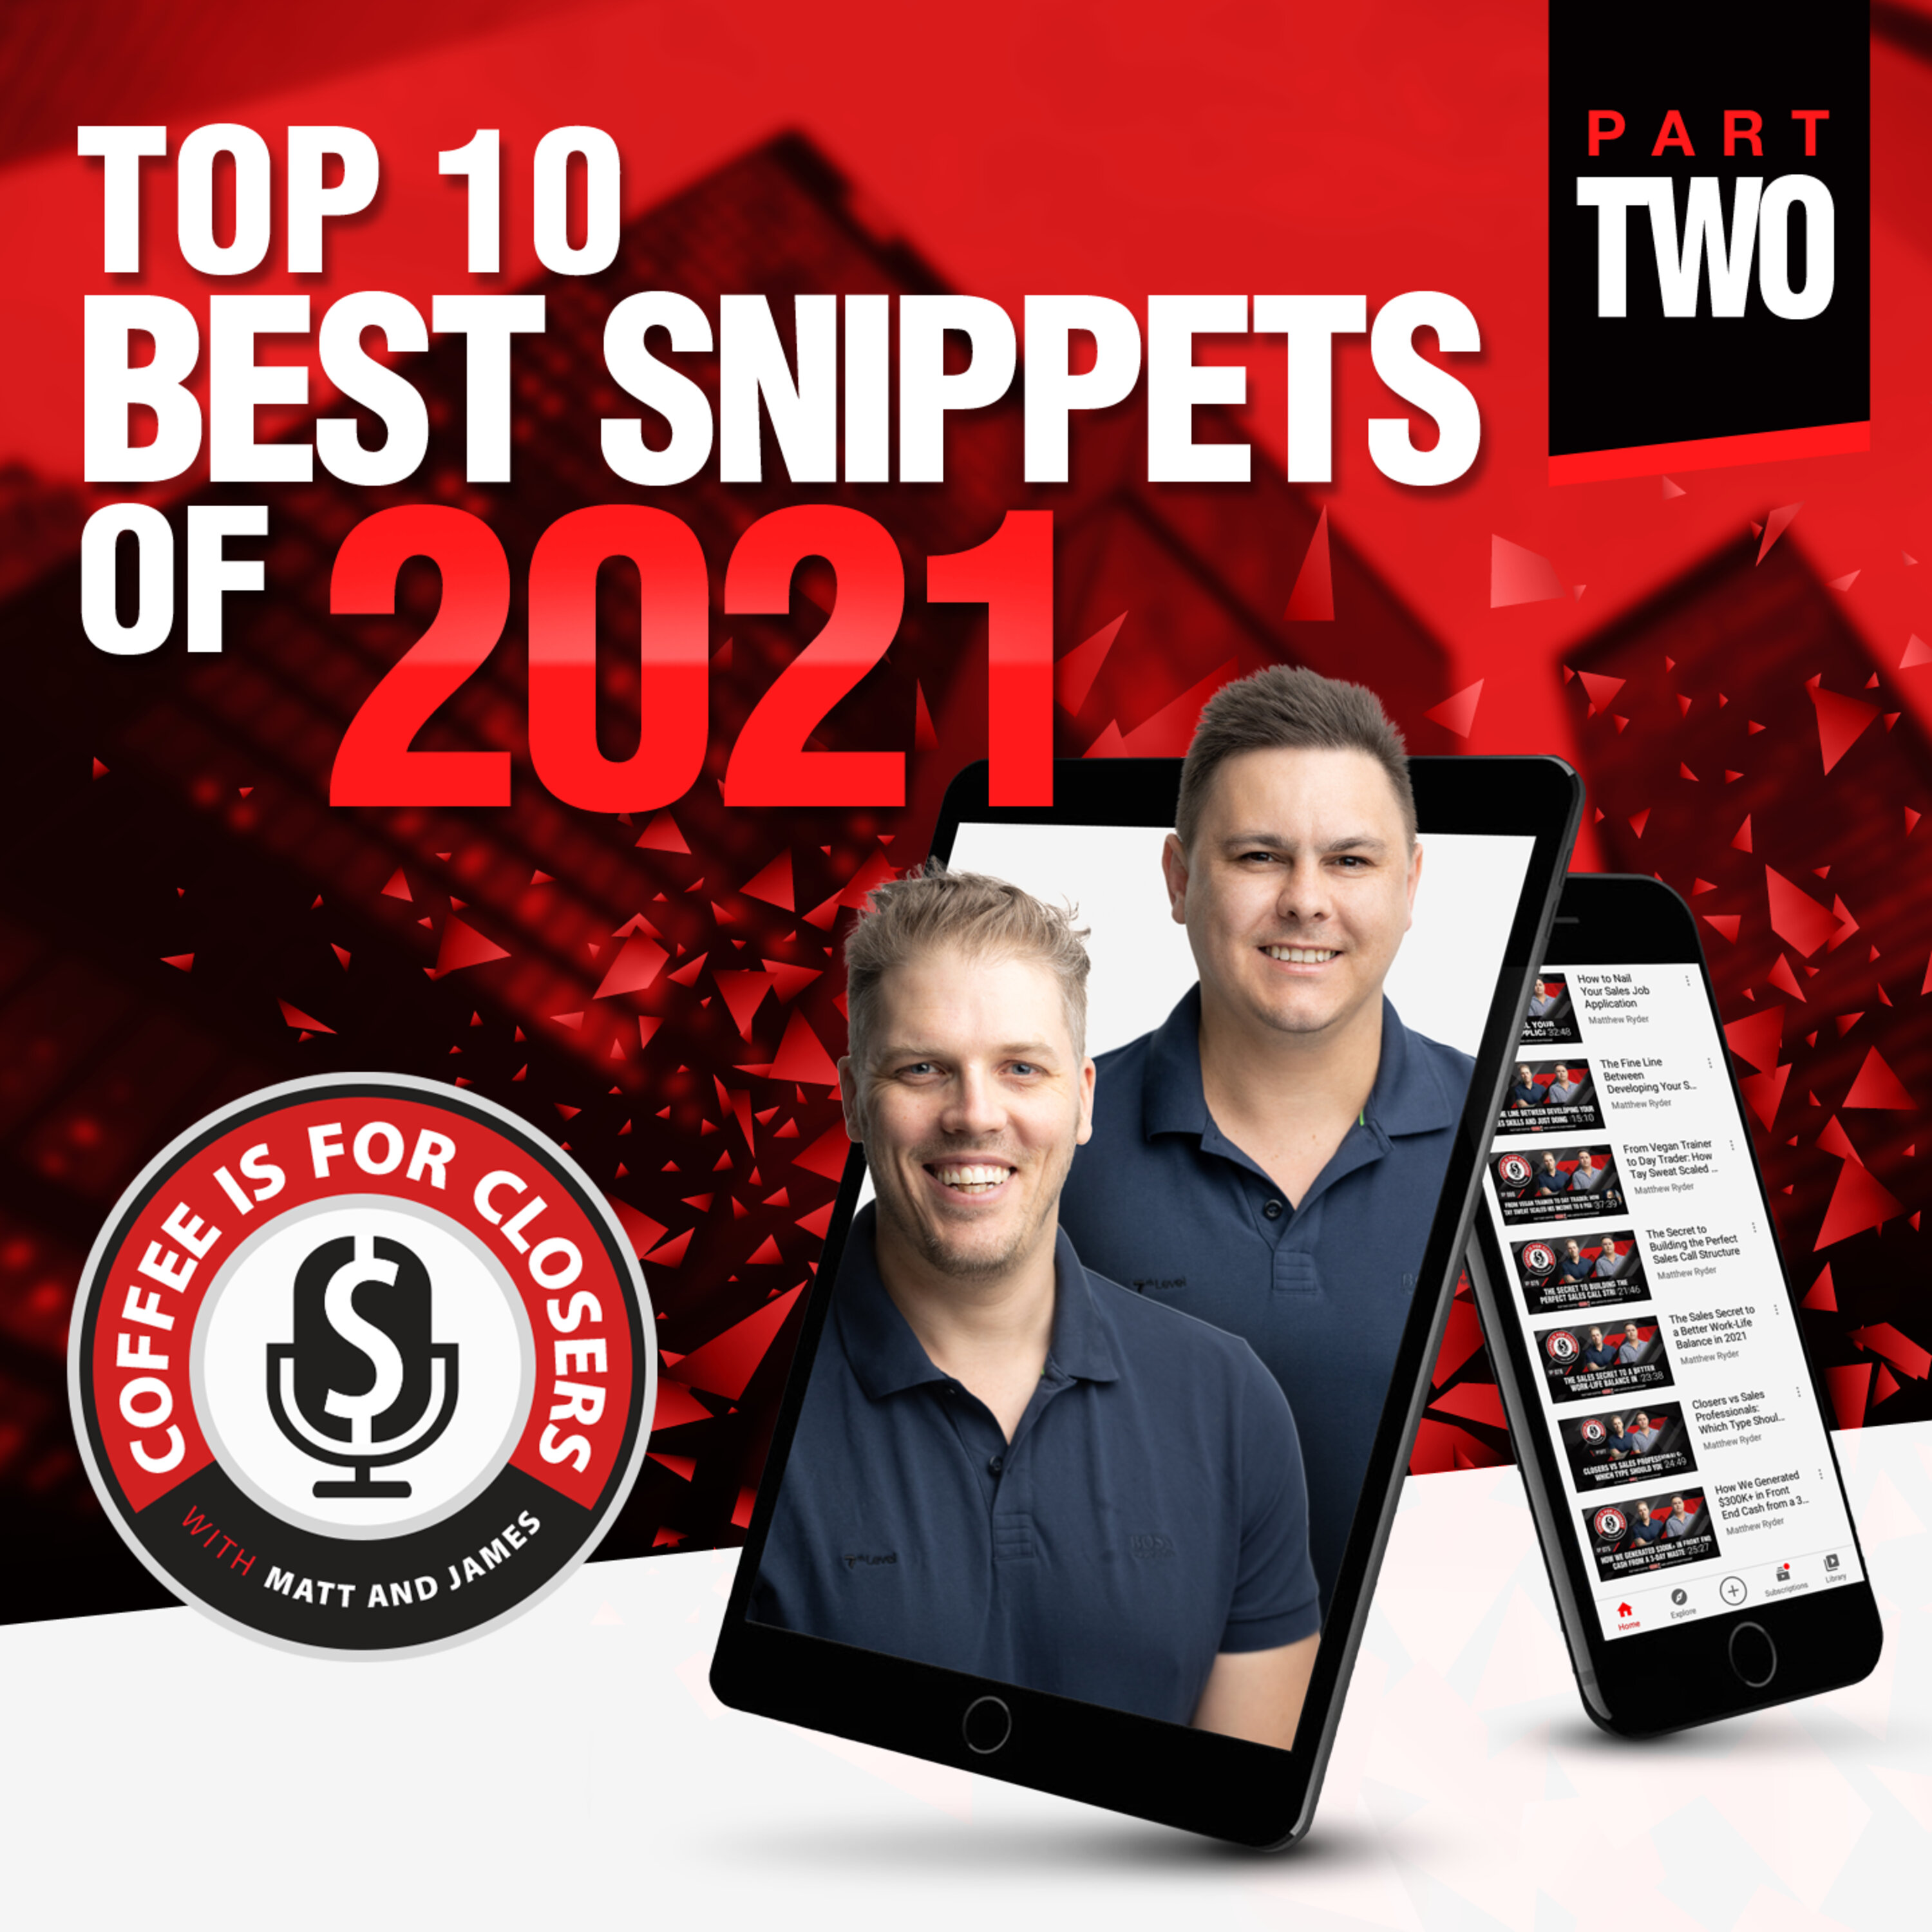 Top 10 Best Snippets of 2021 (Part 2)